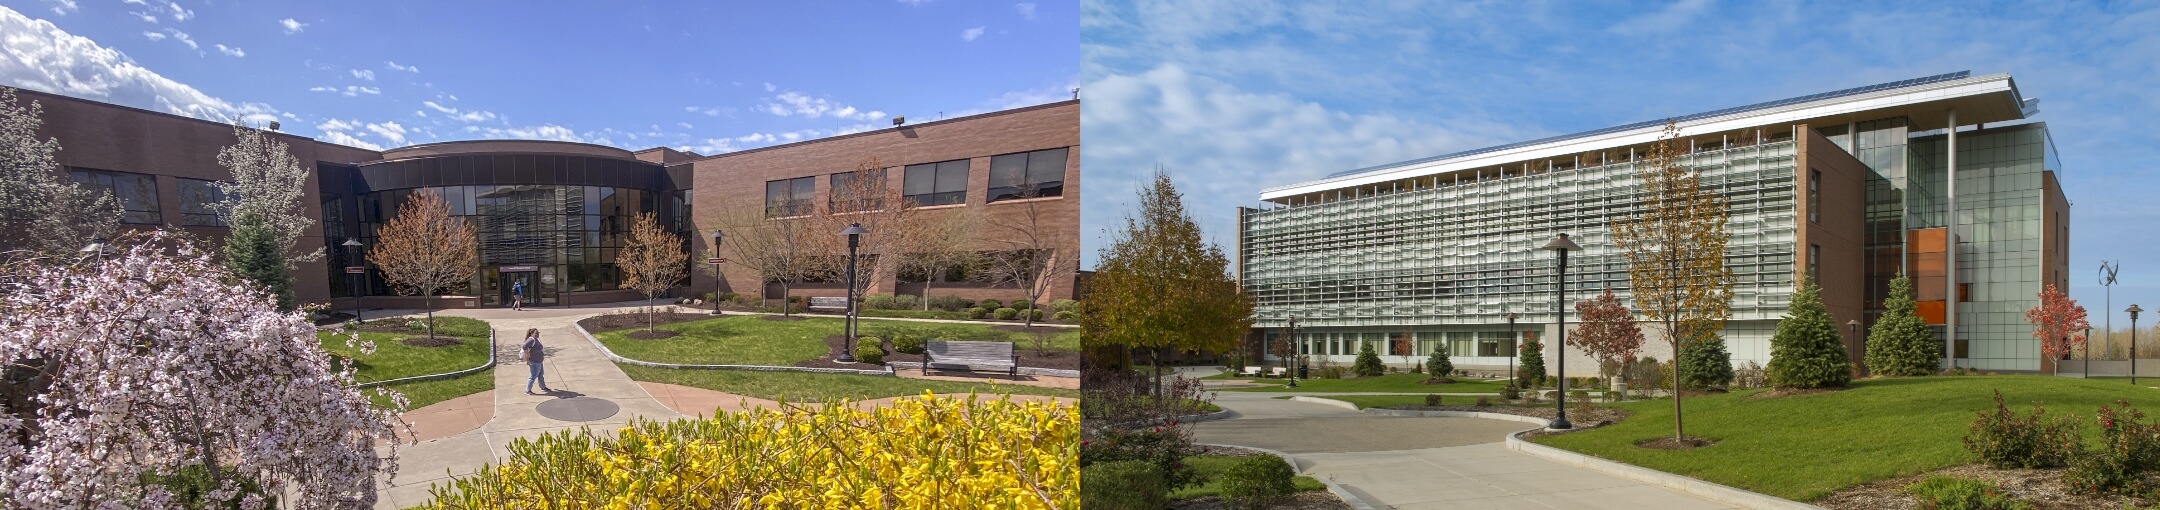 Exterior of Sustainability Hall on the left and Slaughter Hall on the right.